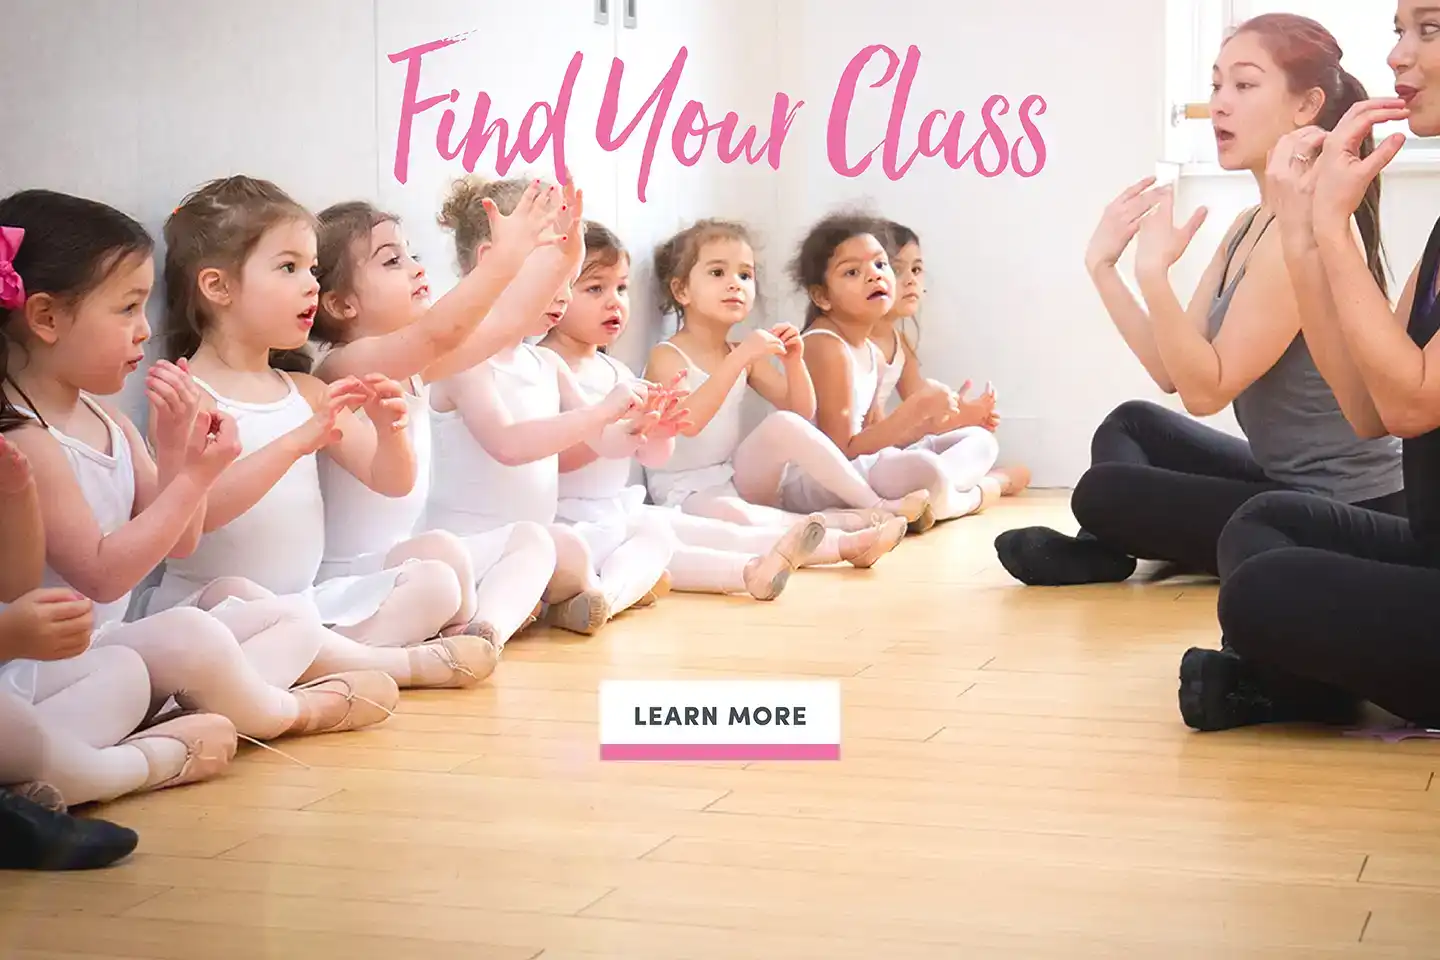 Find your Class